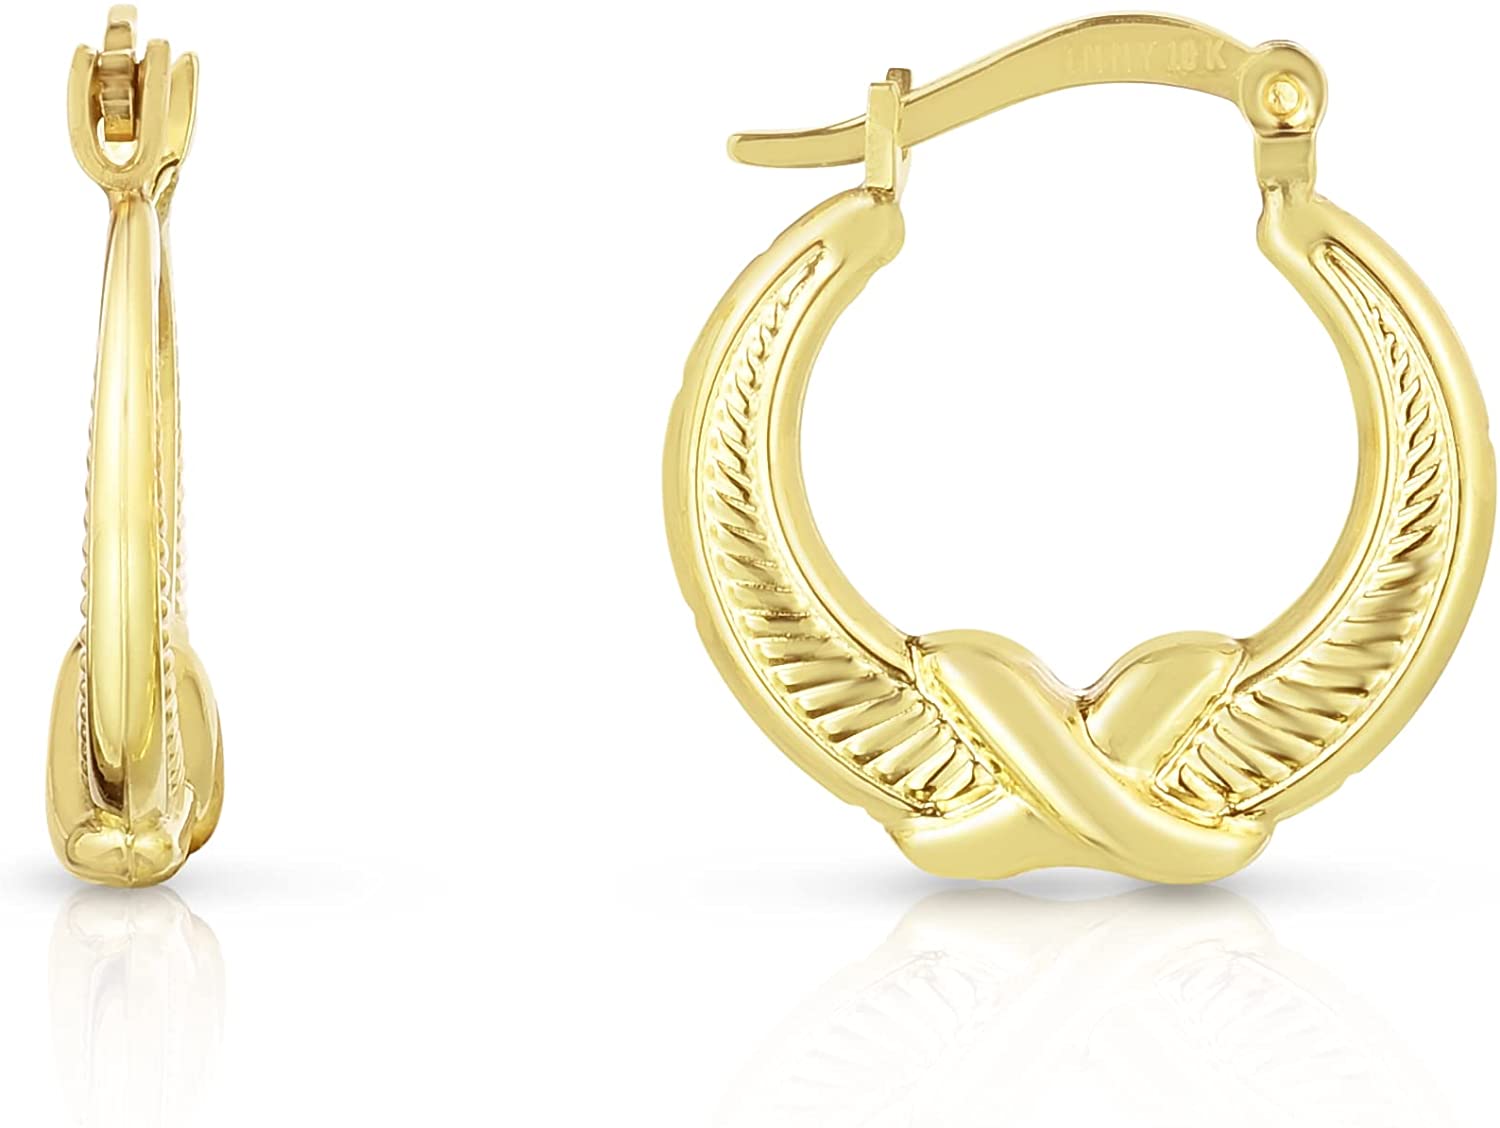 10k Yellow Gold Infinite Knot and Ribbed Hoop Earrings